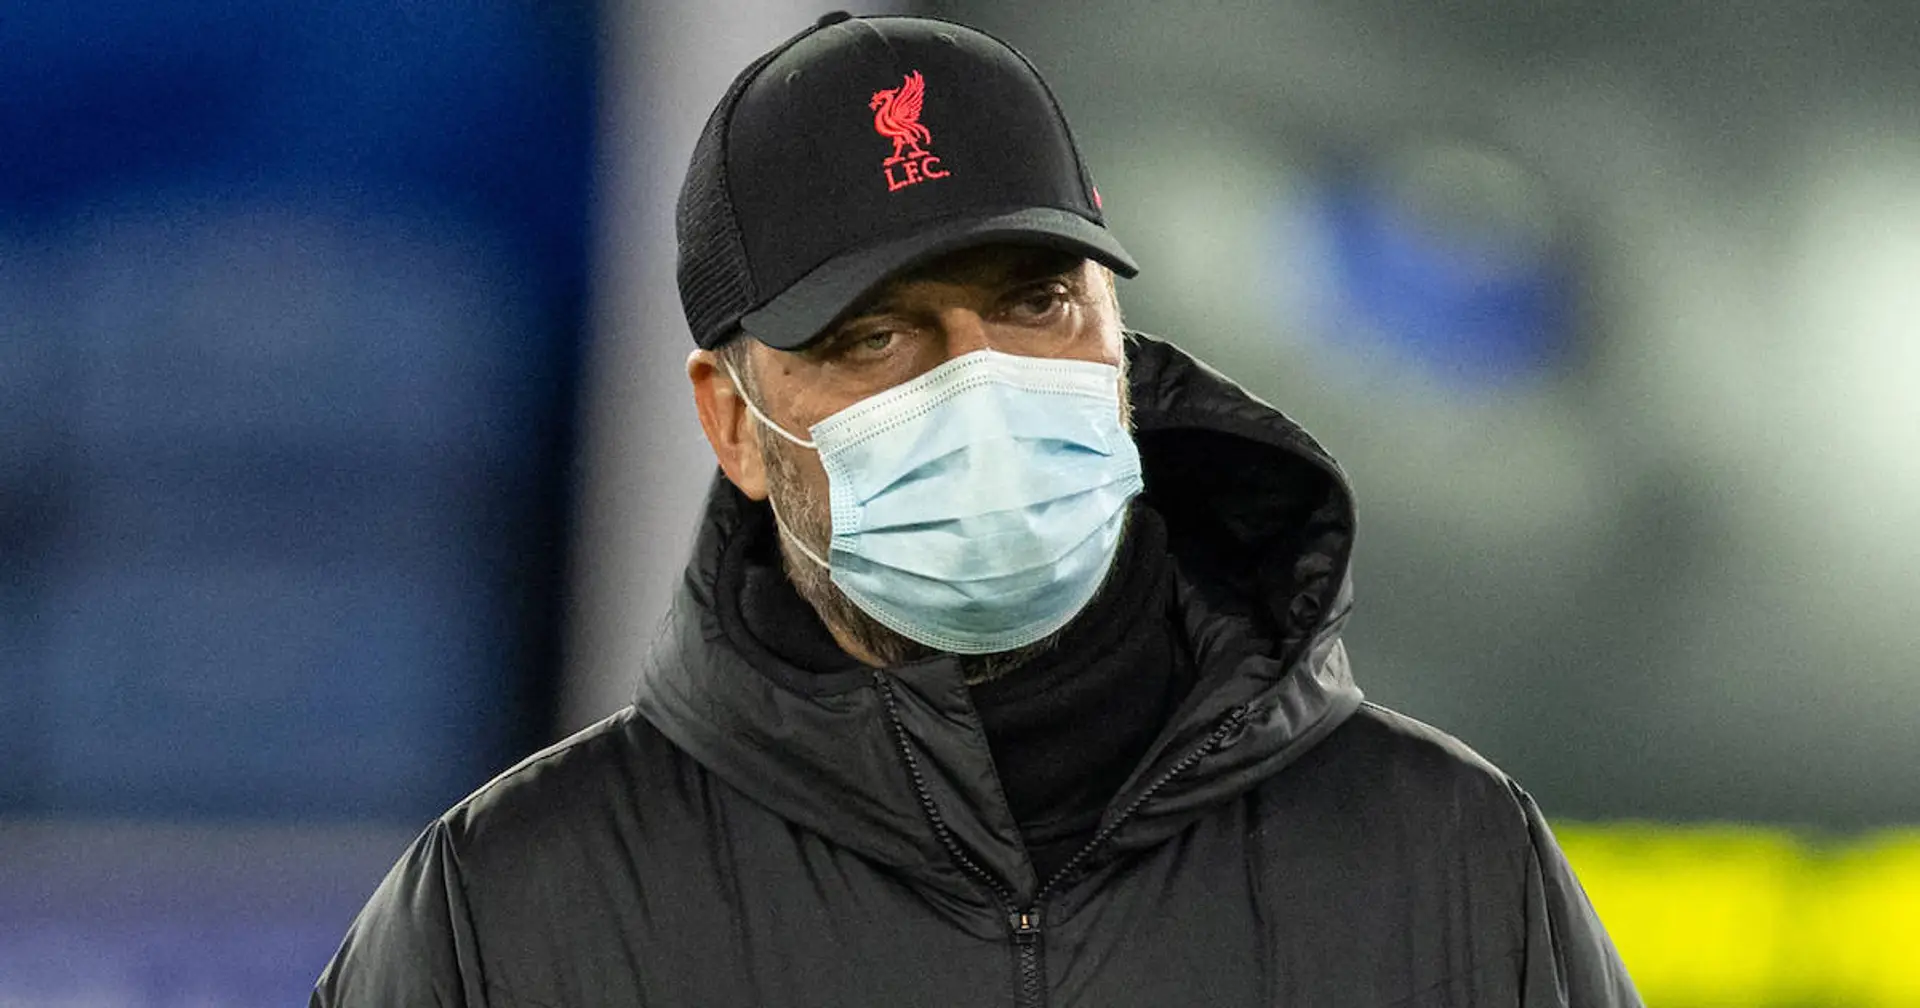 Jurgen Klopp can return to dugout for Shrewsbury Town game on one condition - explained